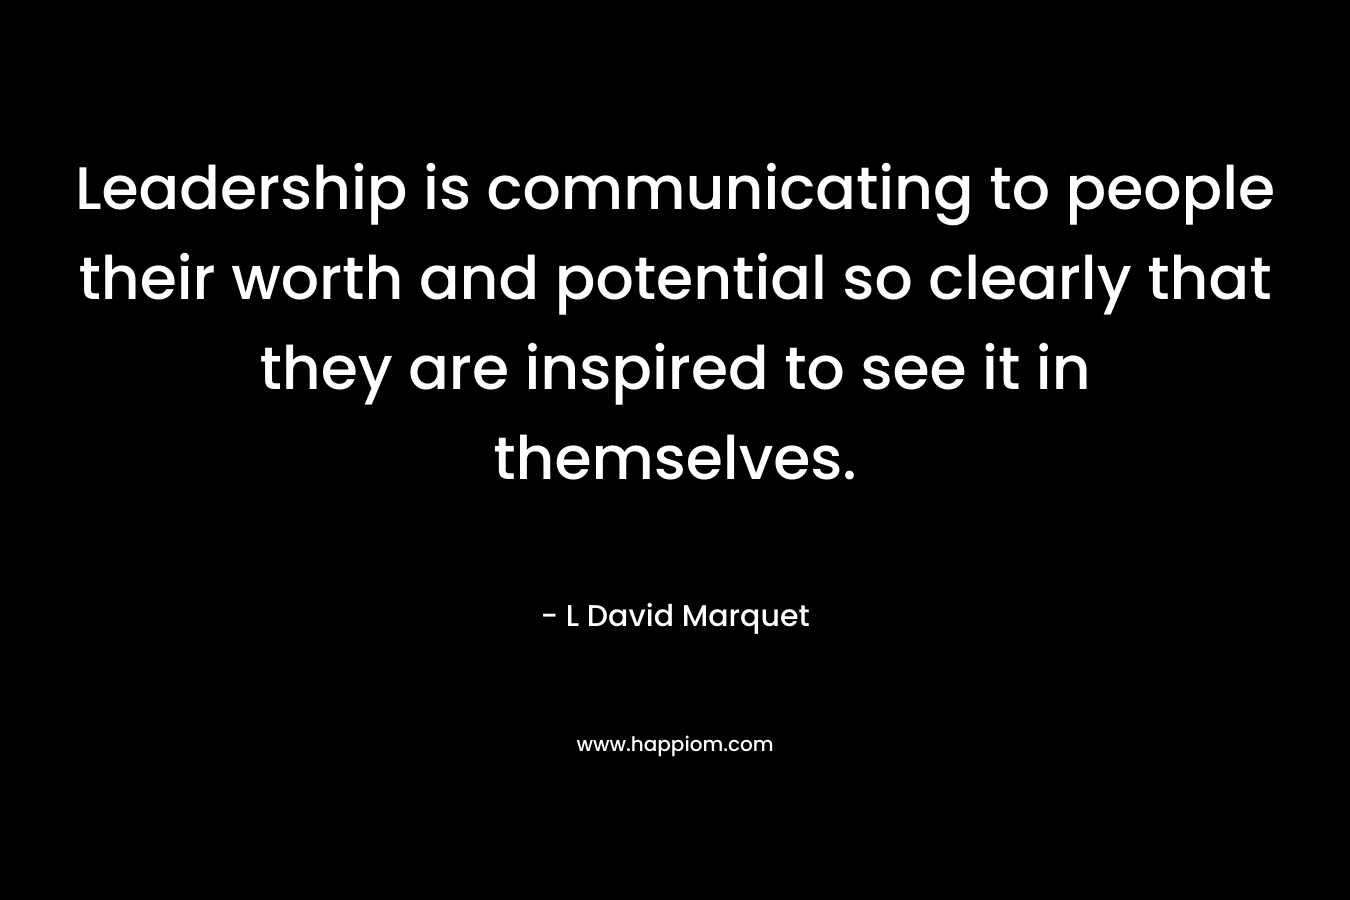 Leadership is communicating to people their worth and potential so clearly that they are inspired to see it in themselves. – L David Marquet